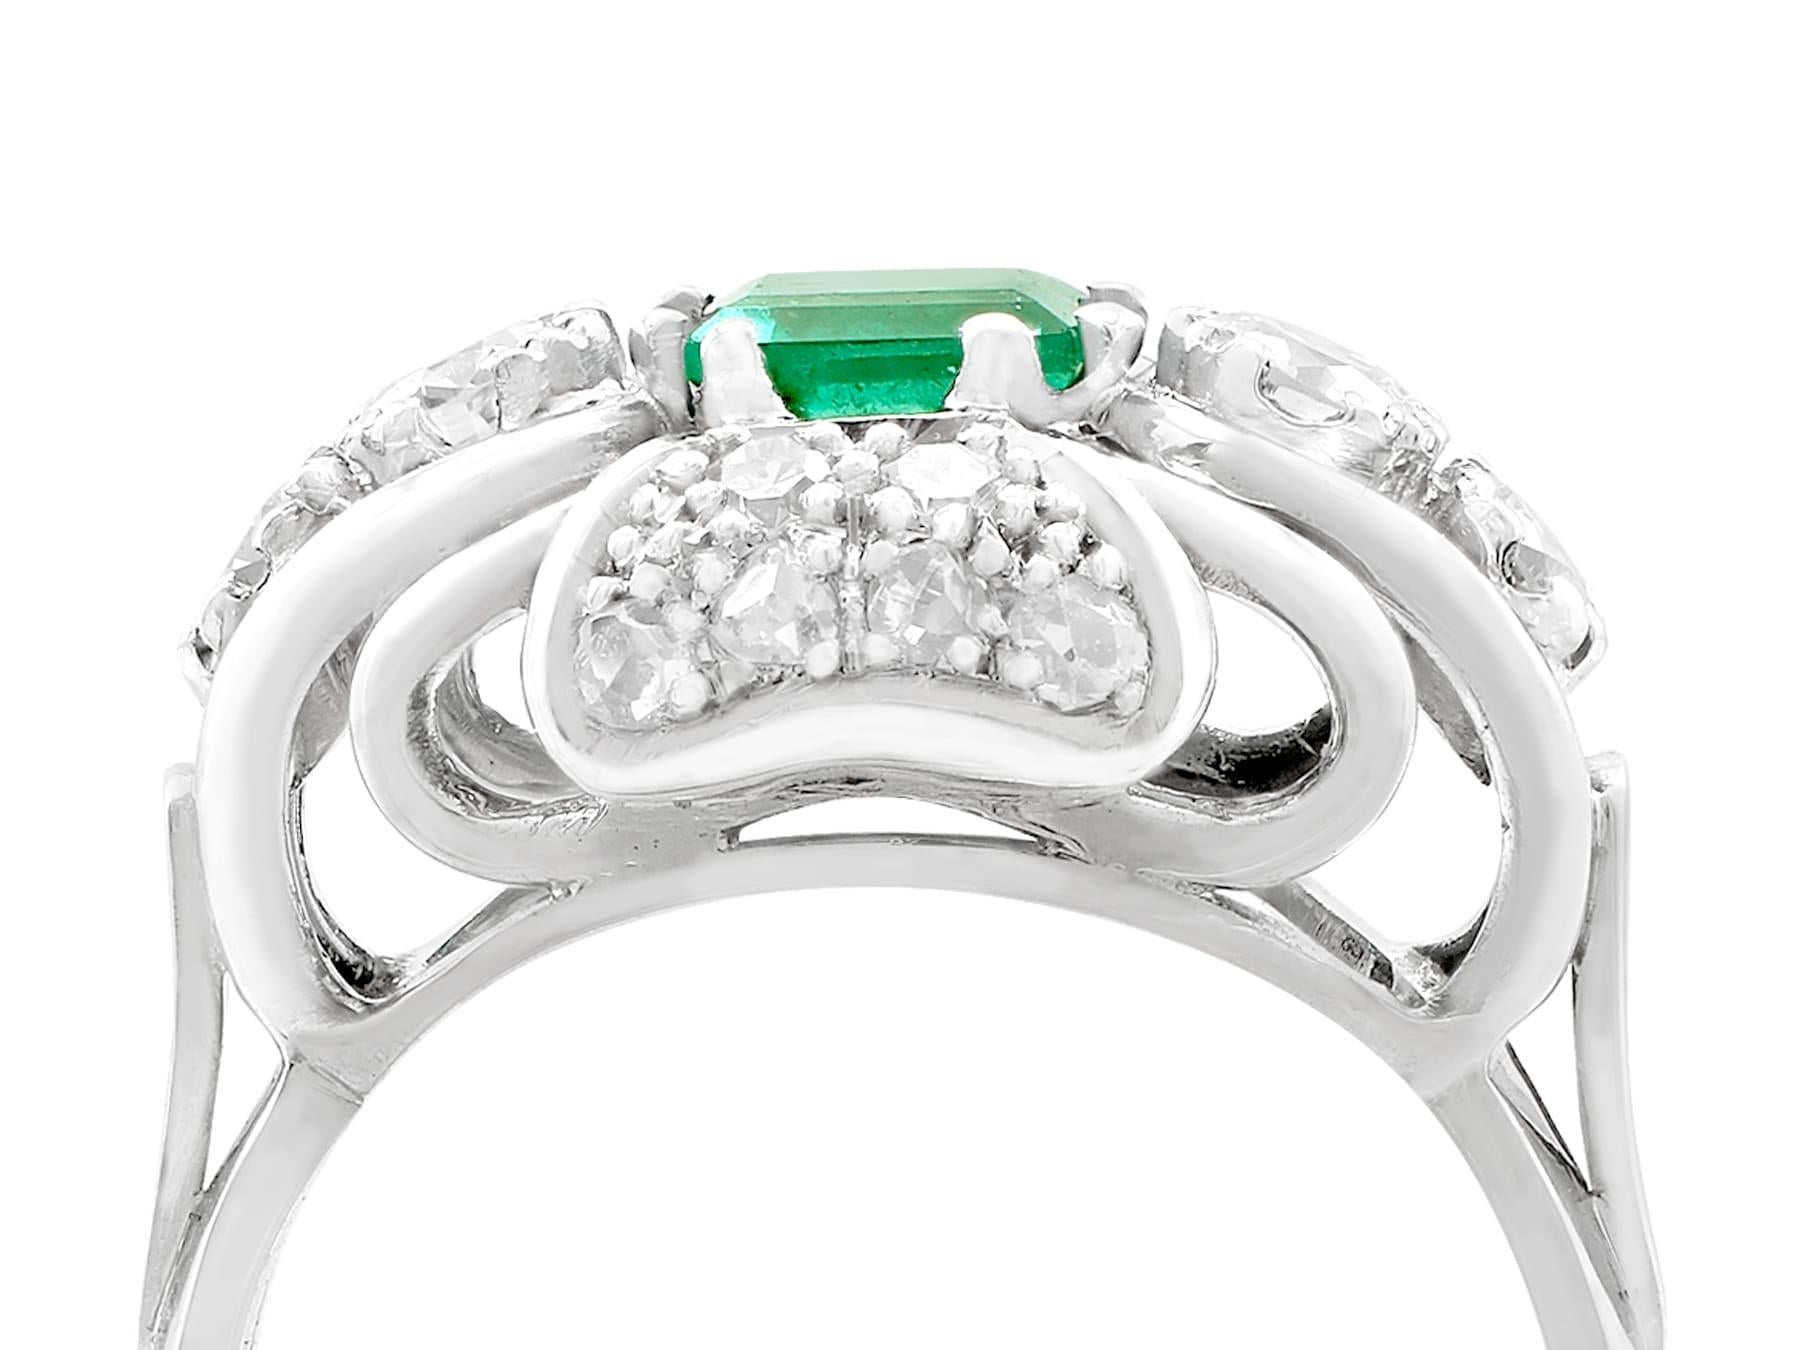 An impressive vintage 1950s 0.55 carat emerald and 0.46 carat diamond, 14 karat white gold dress ring; part of our diverse vintage jewelry and estate jewelry collections.

This fine and impressive vintage emerald and diamond ring has been crafted in